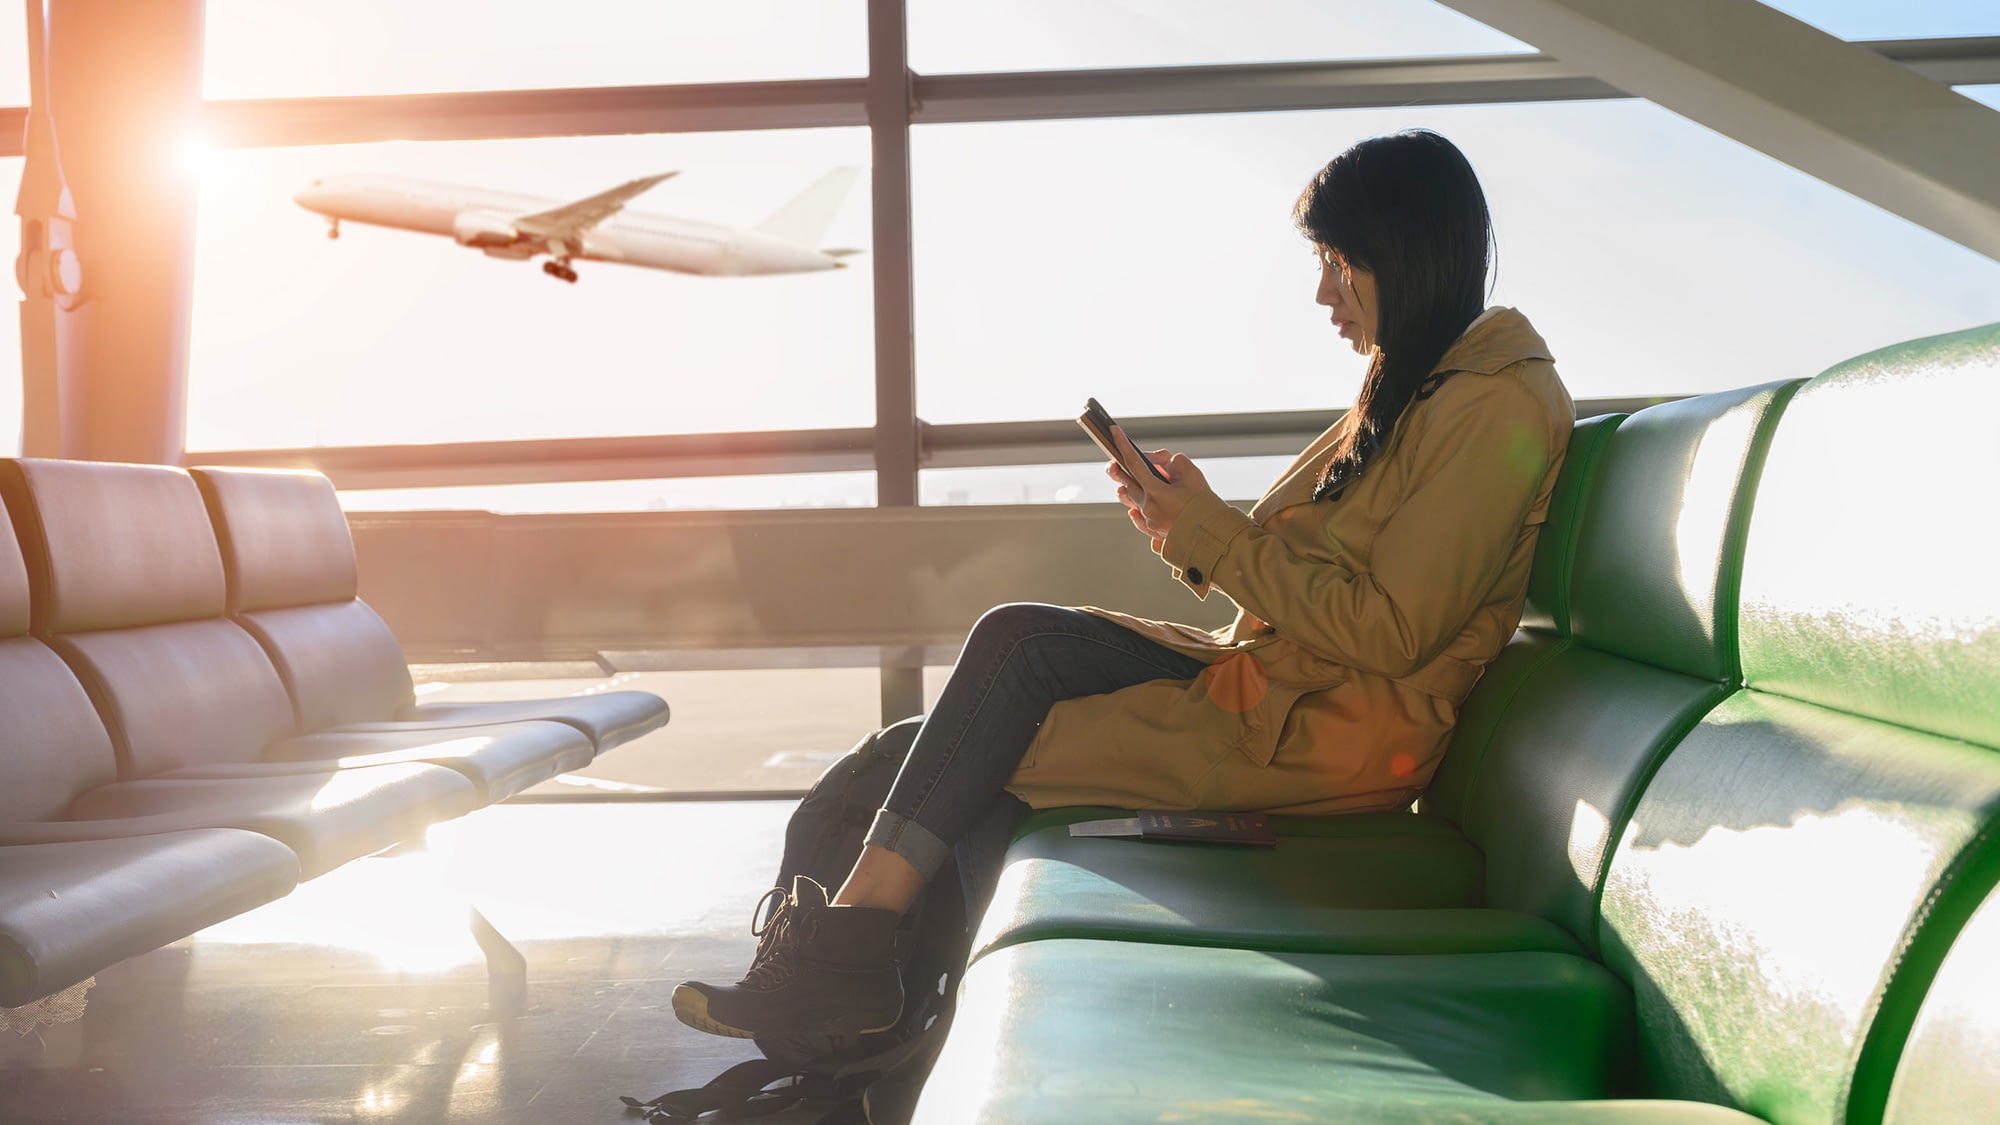 Female waiting in the airport with airplane departing in the background.